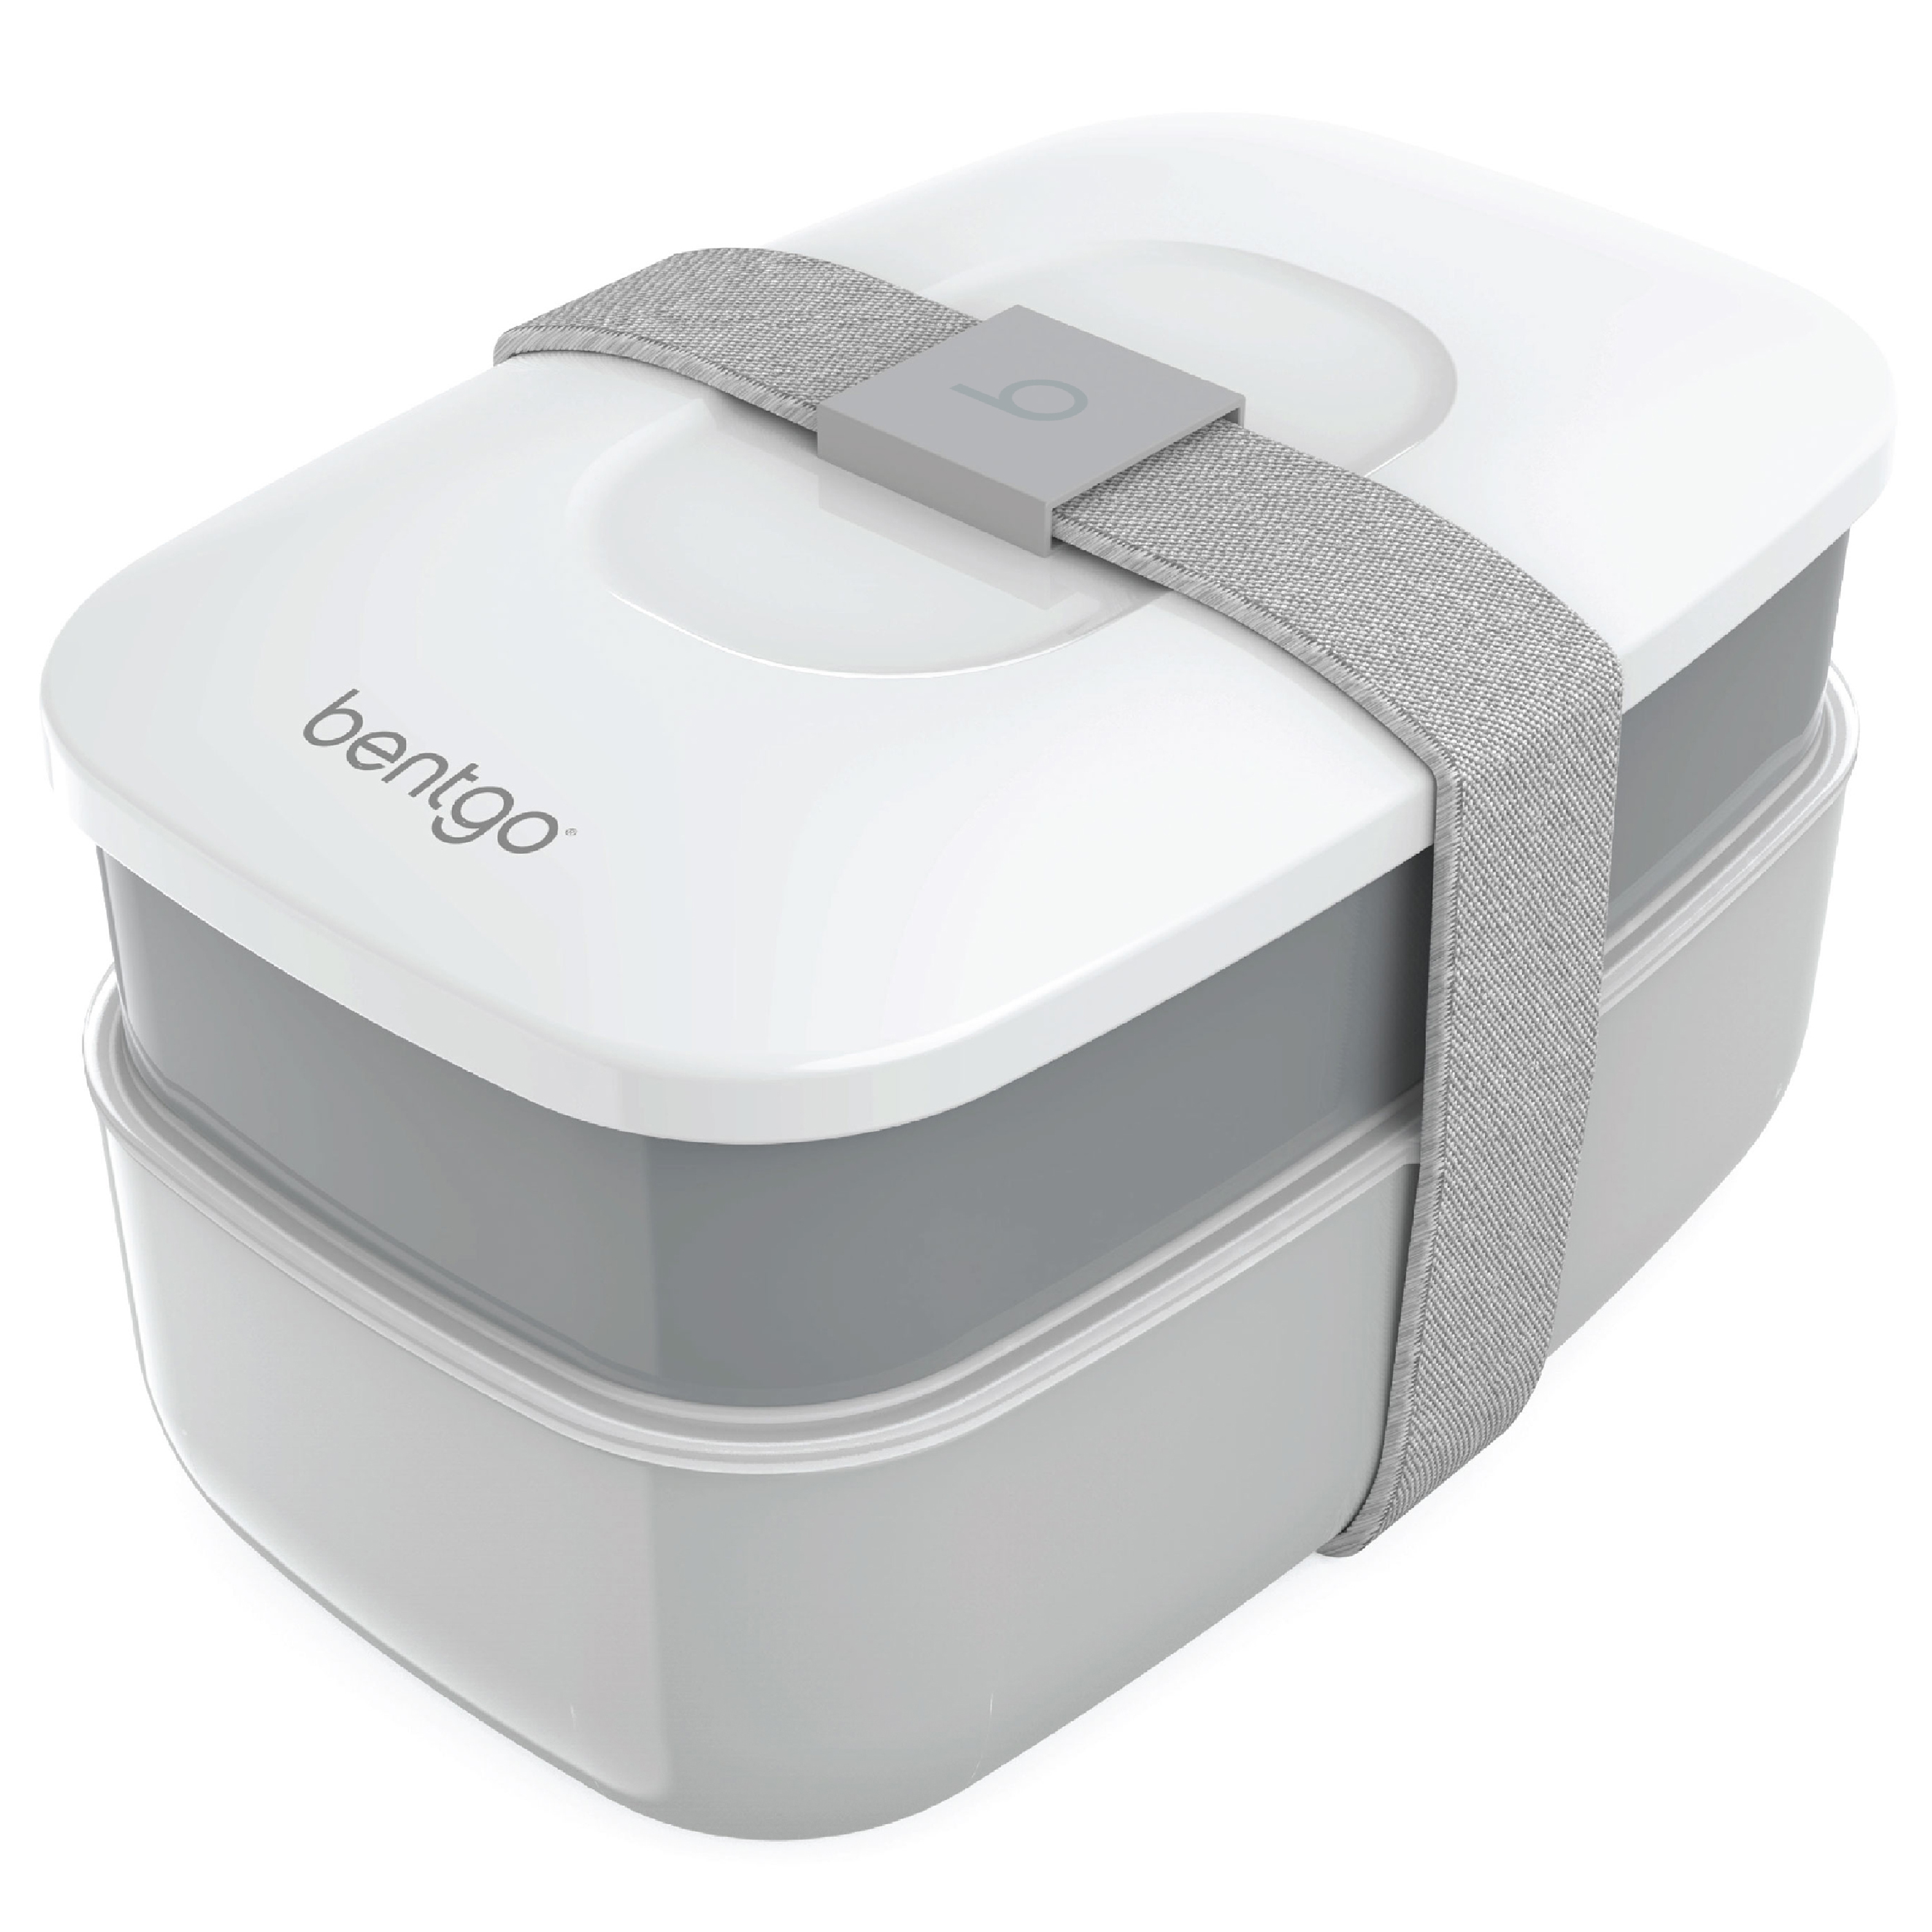 Bentgo Classic (Gray) - All-in-One Stackable Lunch Box Solution - Sleek and Modern Bento Box Design Includes 2 Stackable Containers, Built-in Plastic Silverware, and Sealing Strap - image 1 of 6